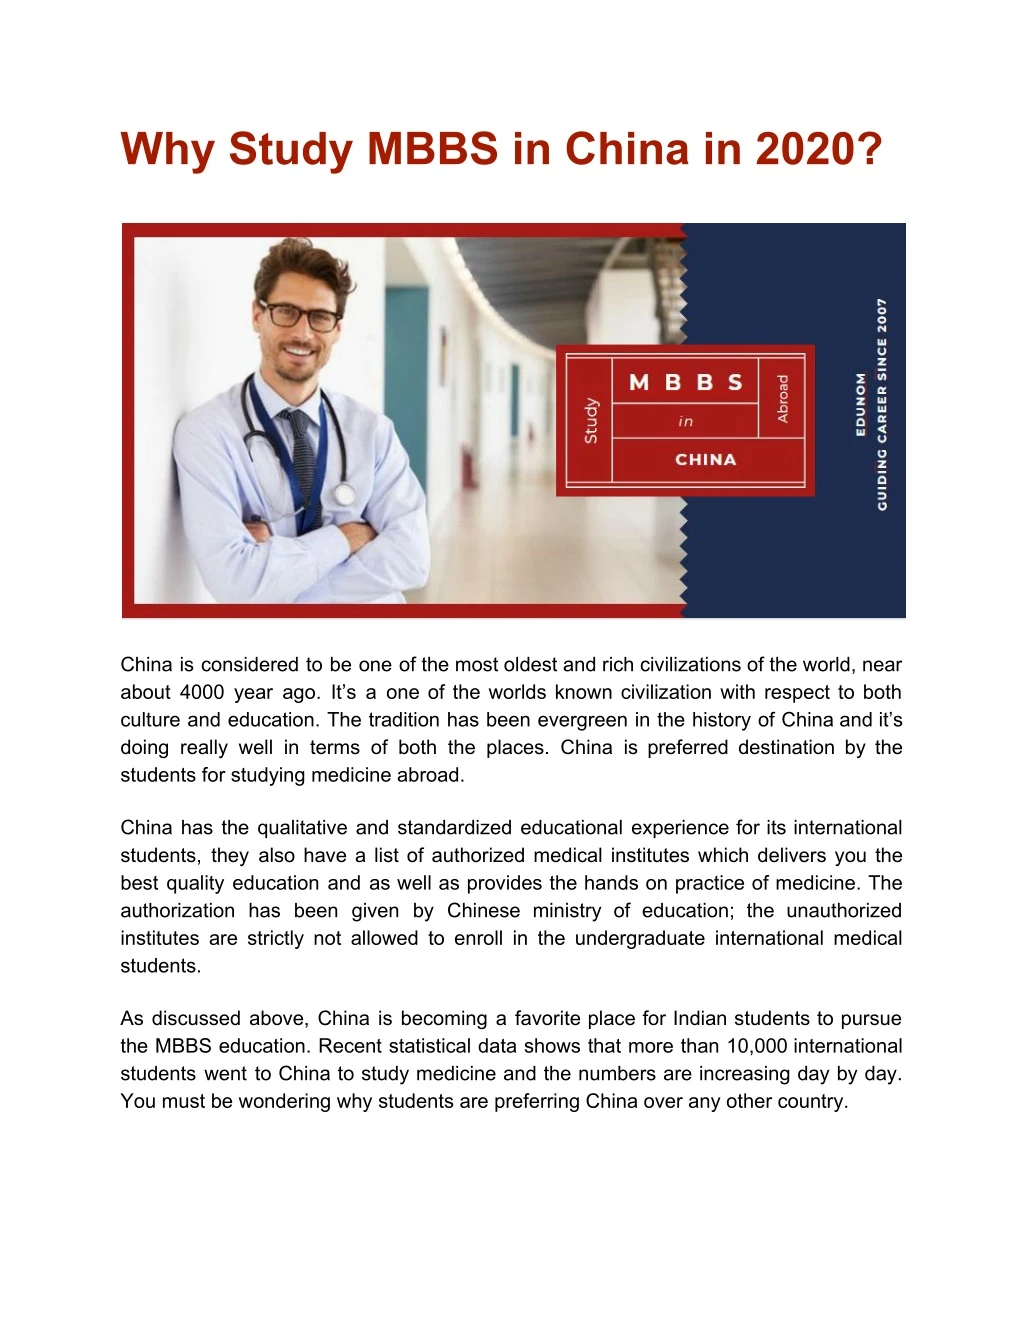 why study mbbs in china in 2020